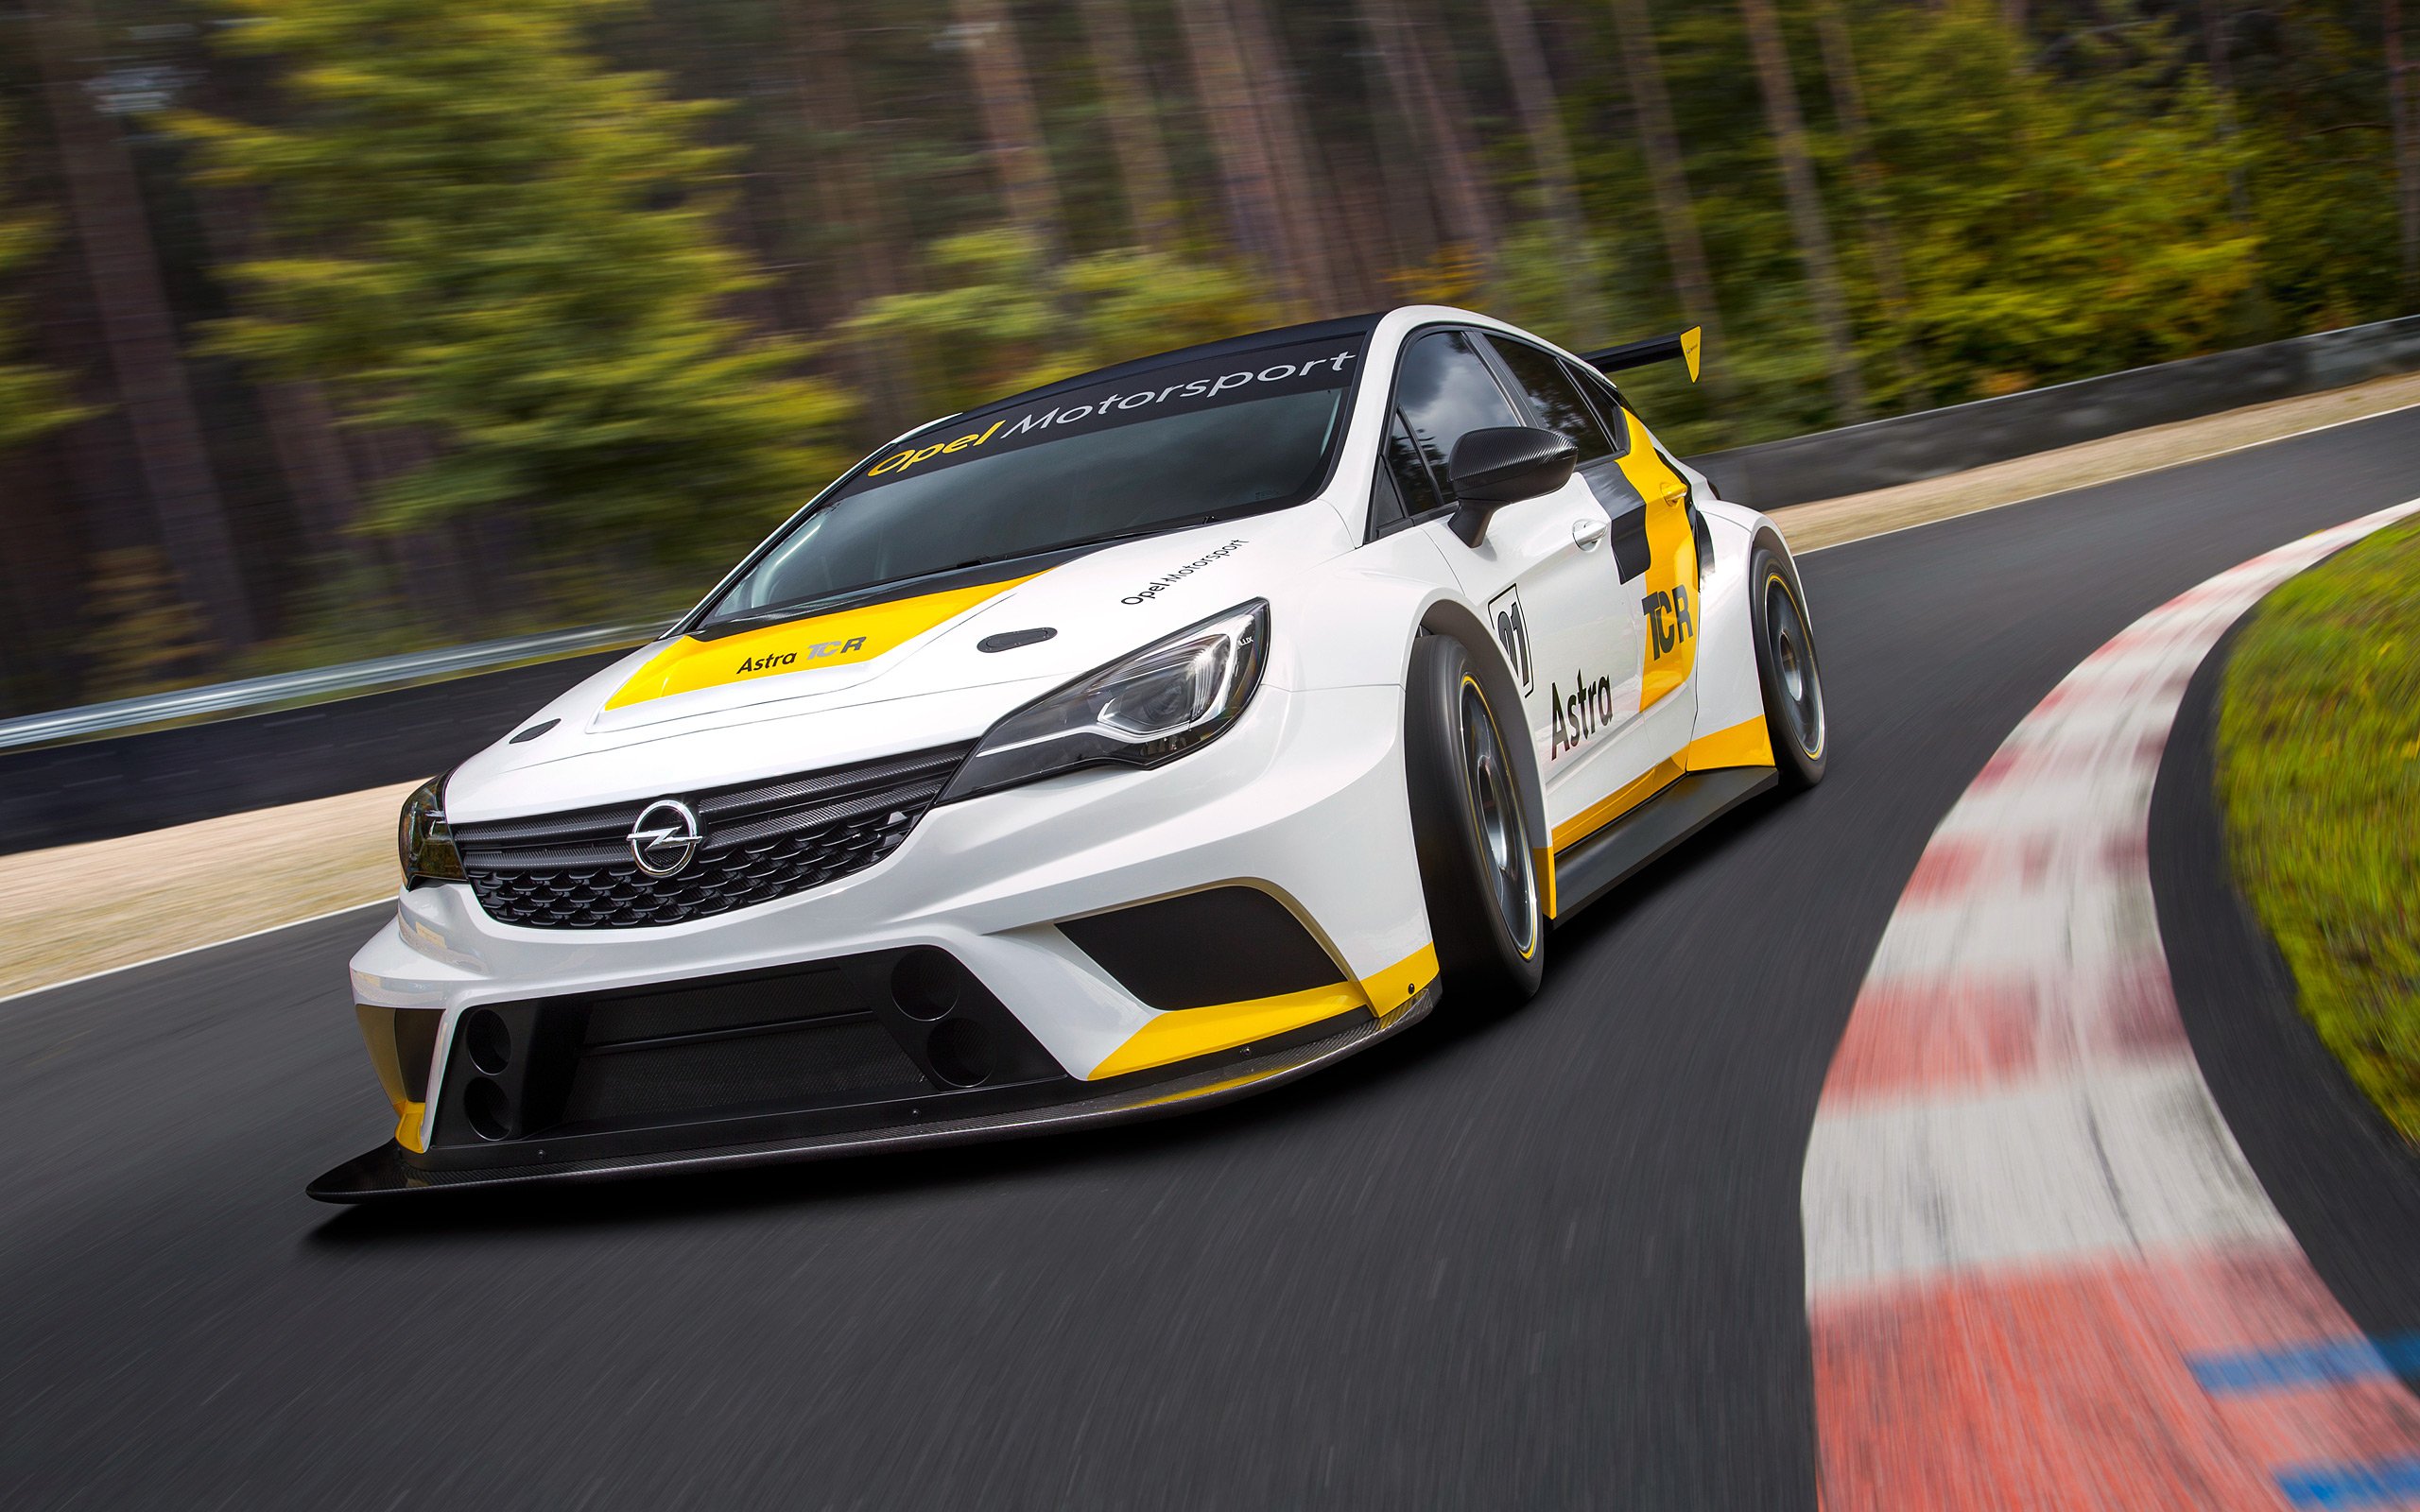 2016, Opel, Astra, Tcr, Rally, Race, Racing Wallpaper